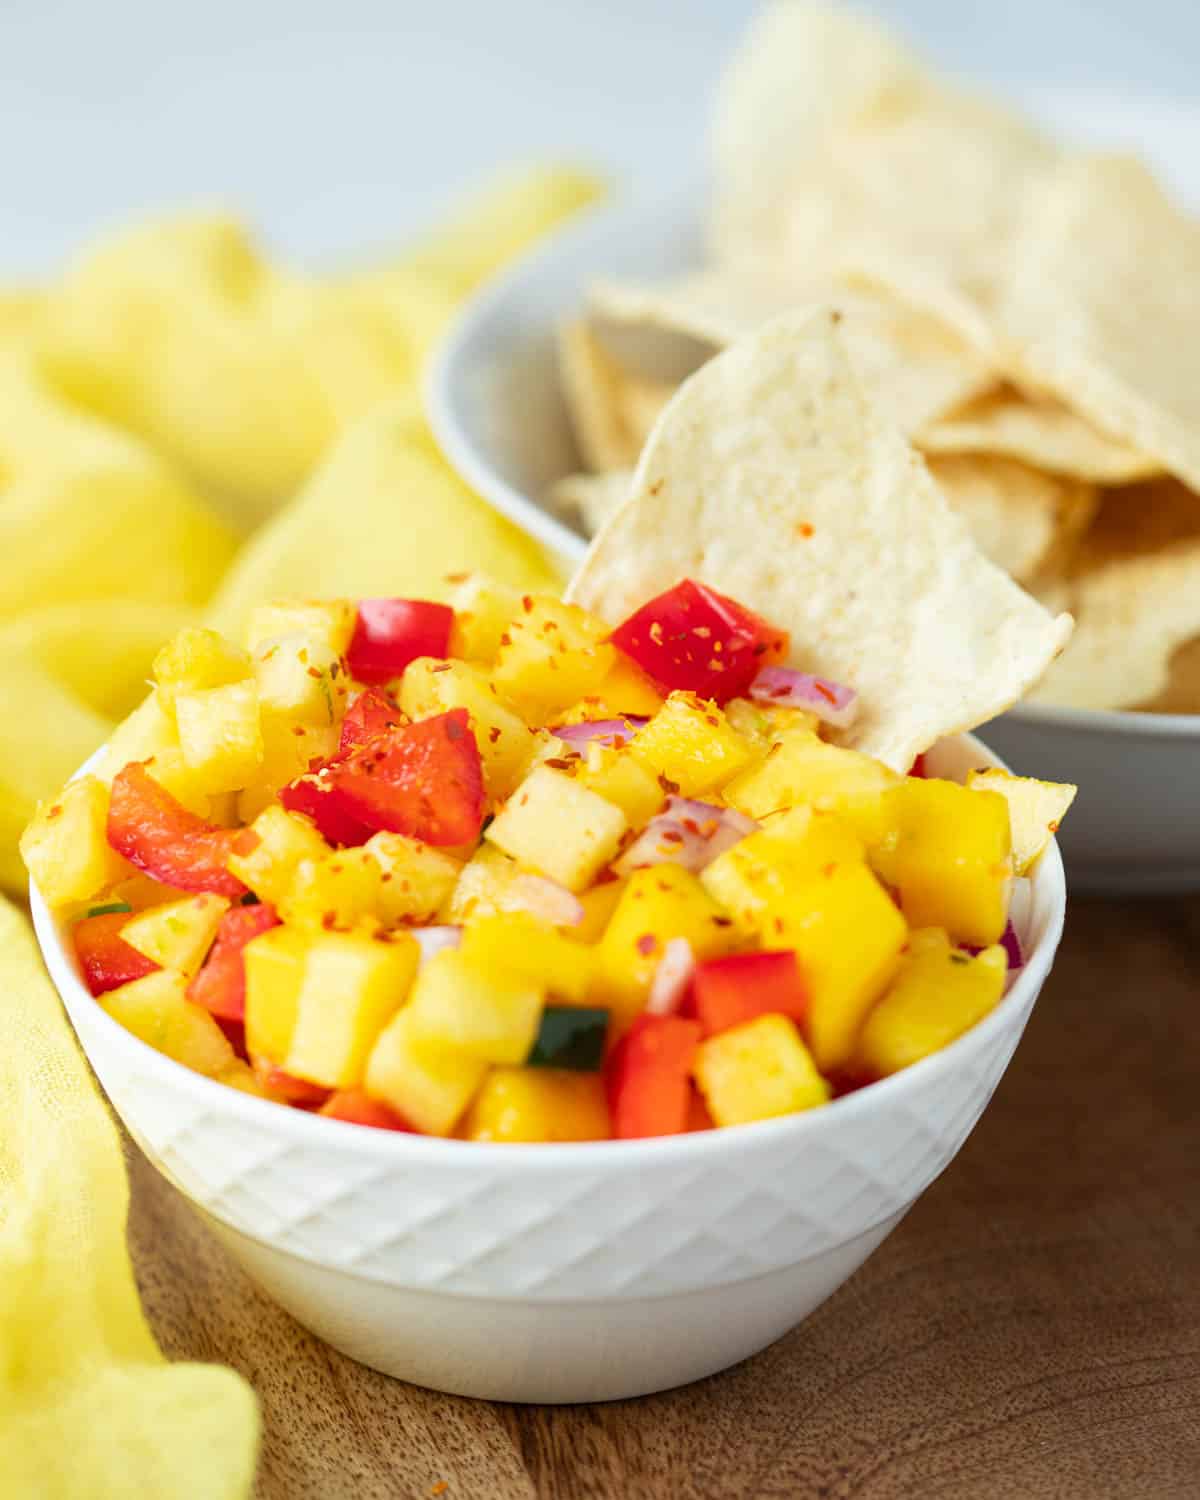 Pineapple mango salsa with a chip in the dip.
